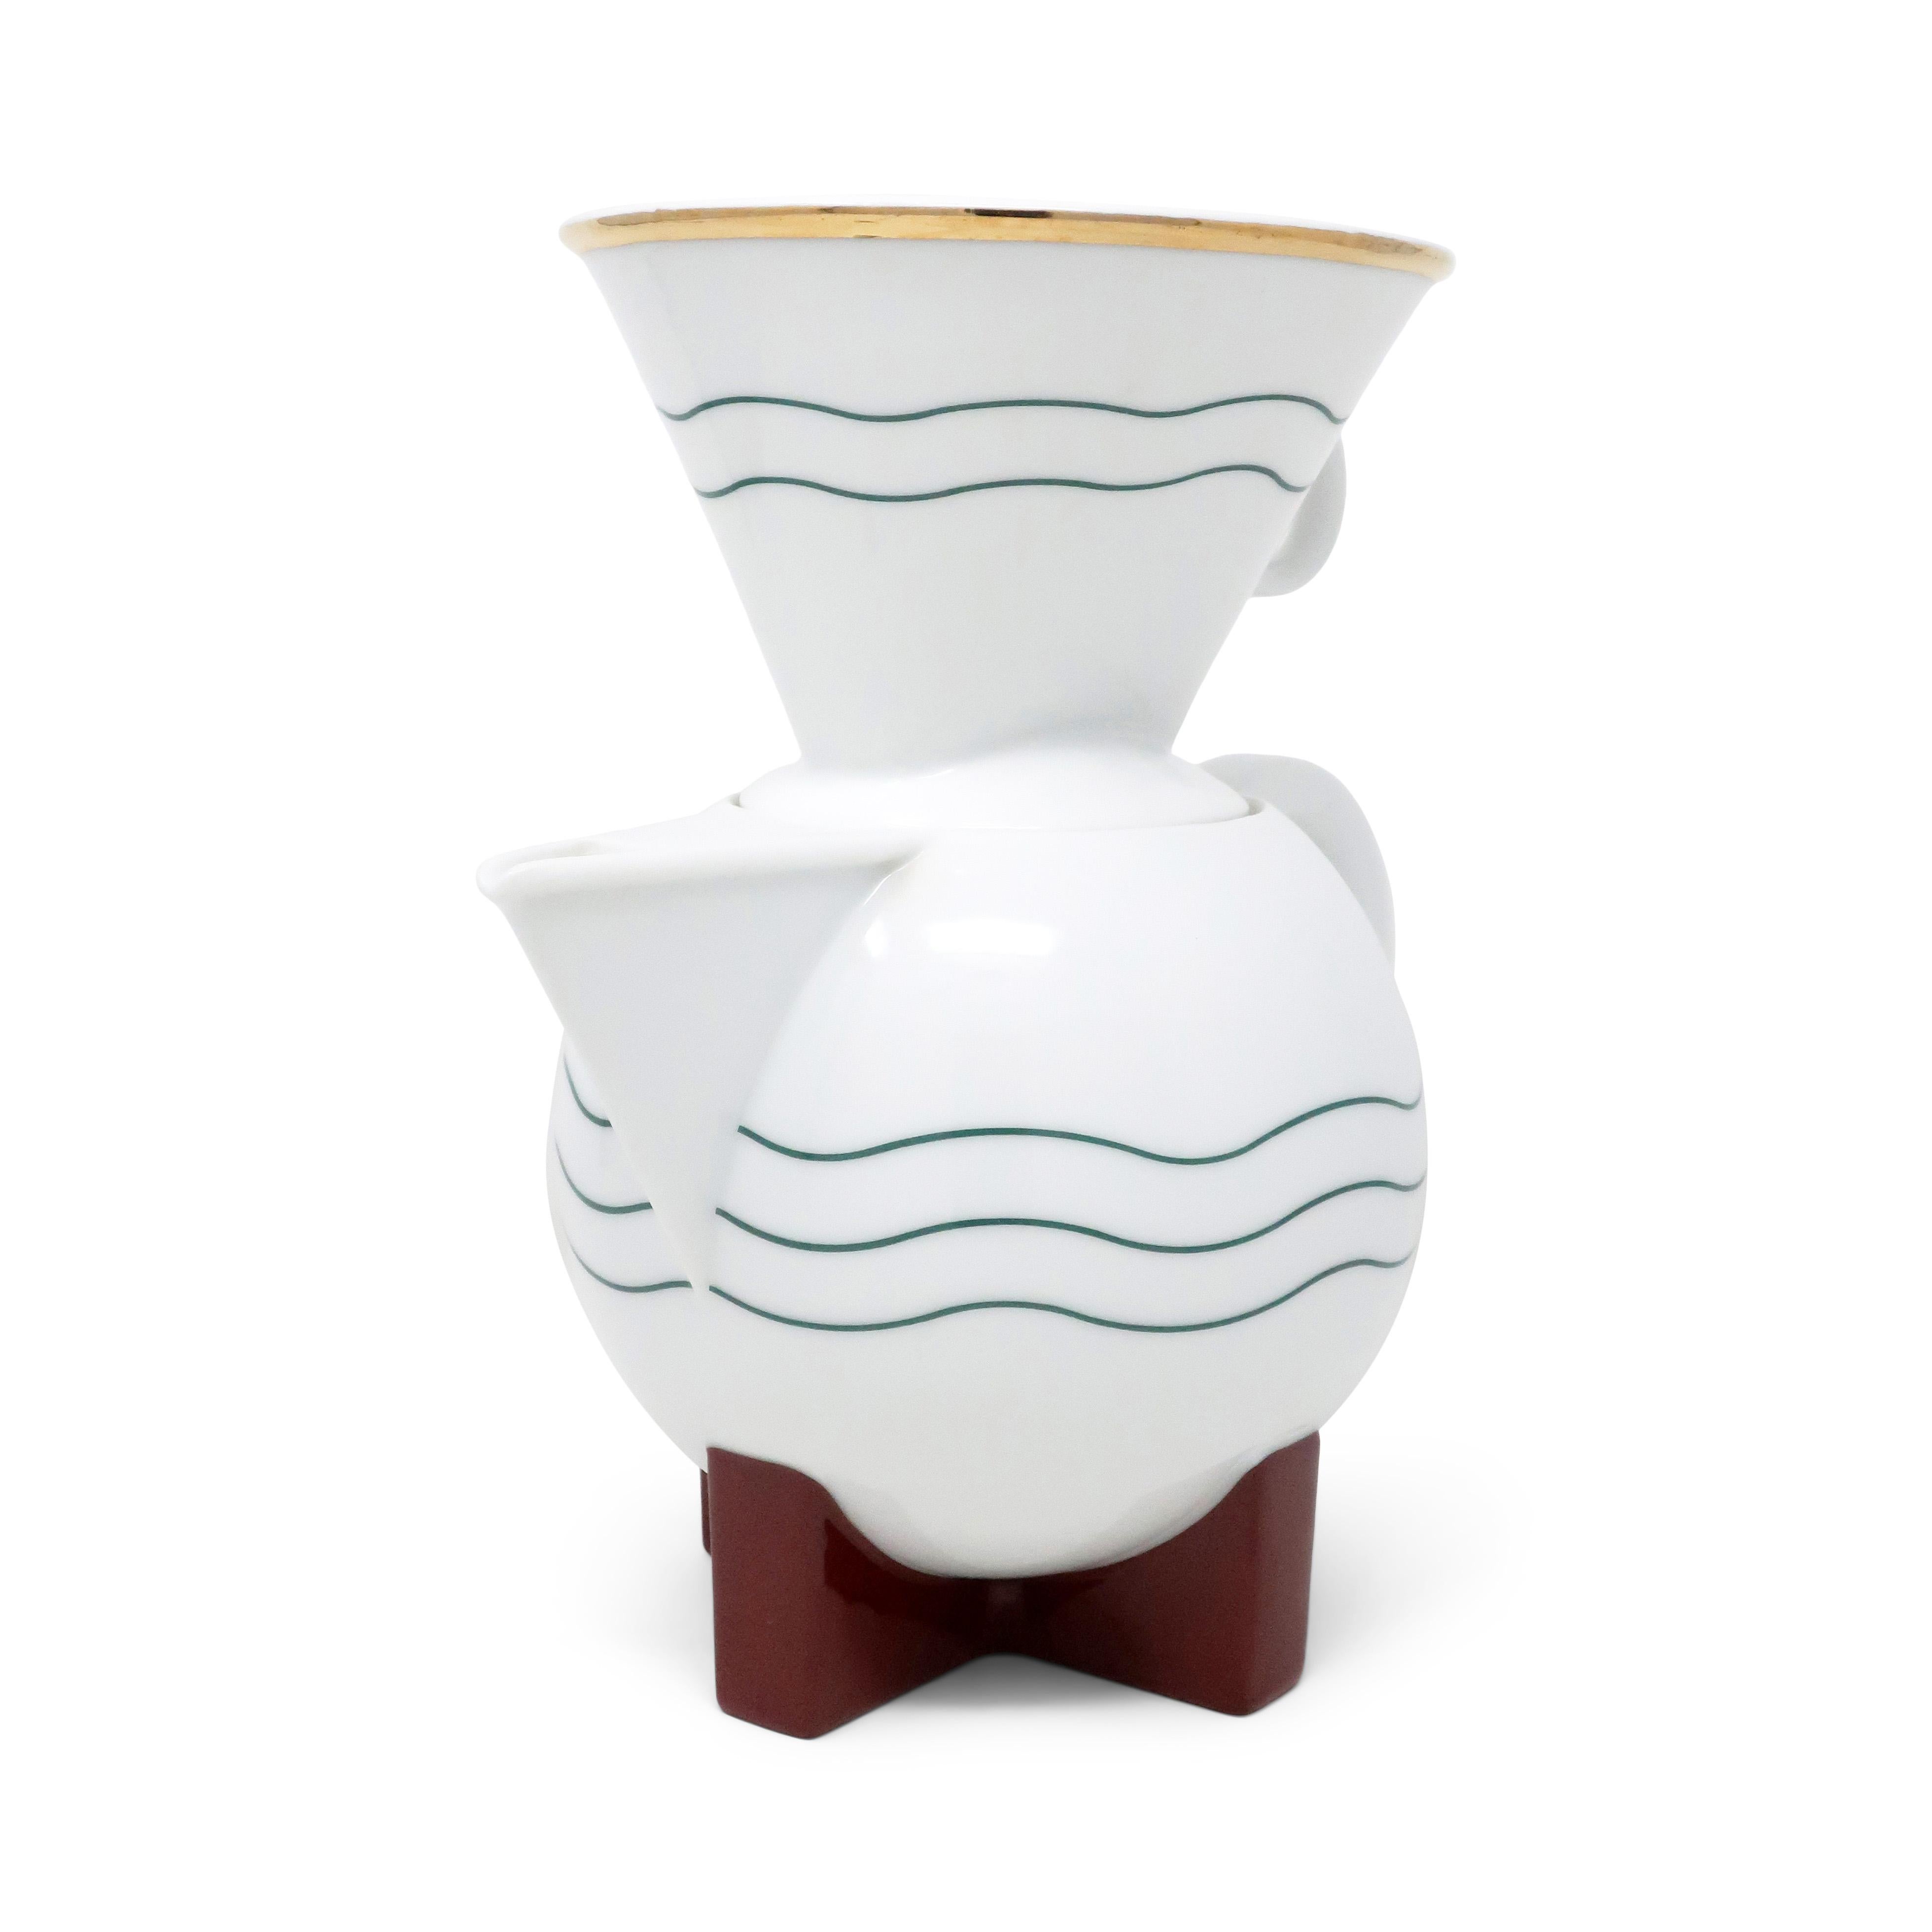 Perhaps Michael Graves’ (1934-2015) most well-known design for Swid Powell, The Little Dripper (1986) is a 10 cup coffee pot born from Graves’ preference for drip coffee and a lack of available drip coffee makers that met his aesthetic standards.